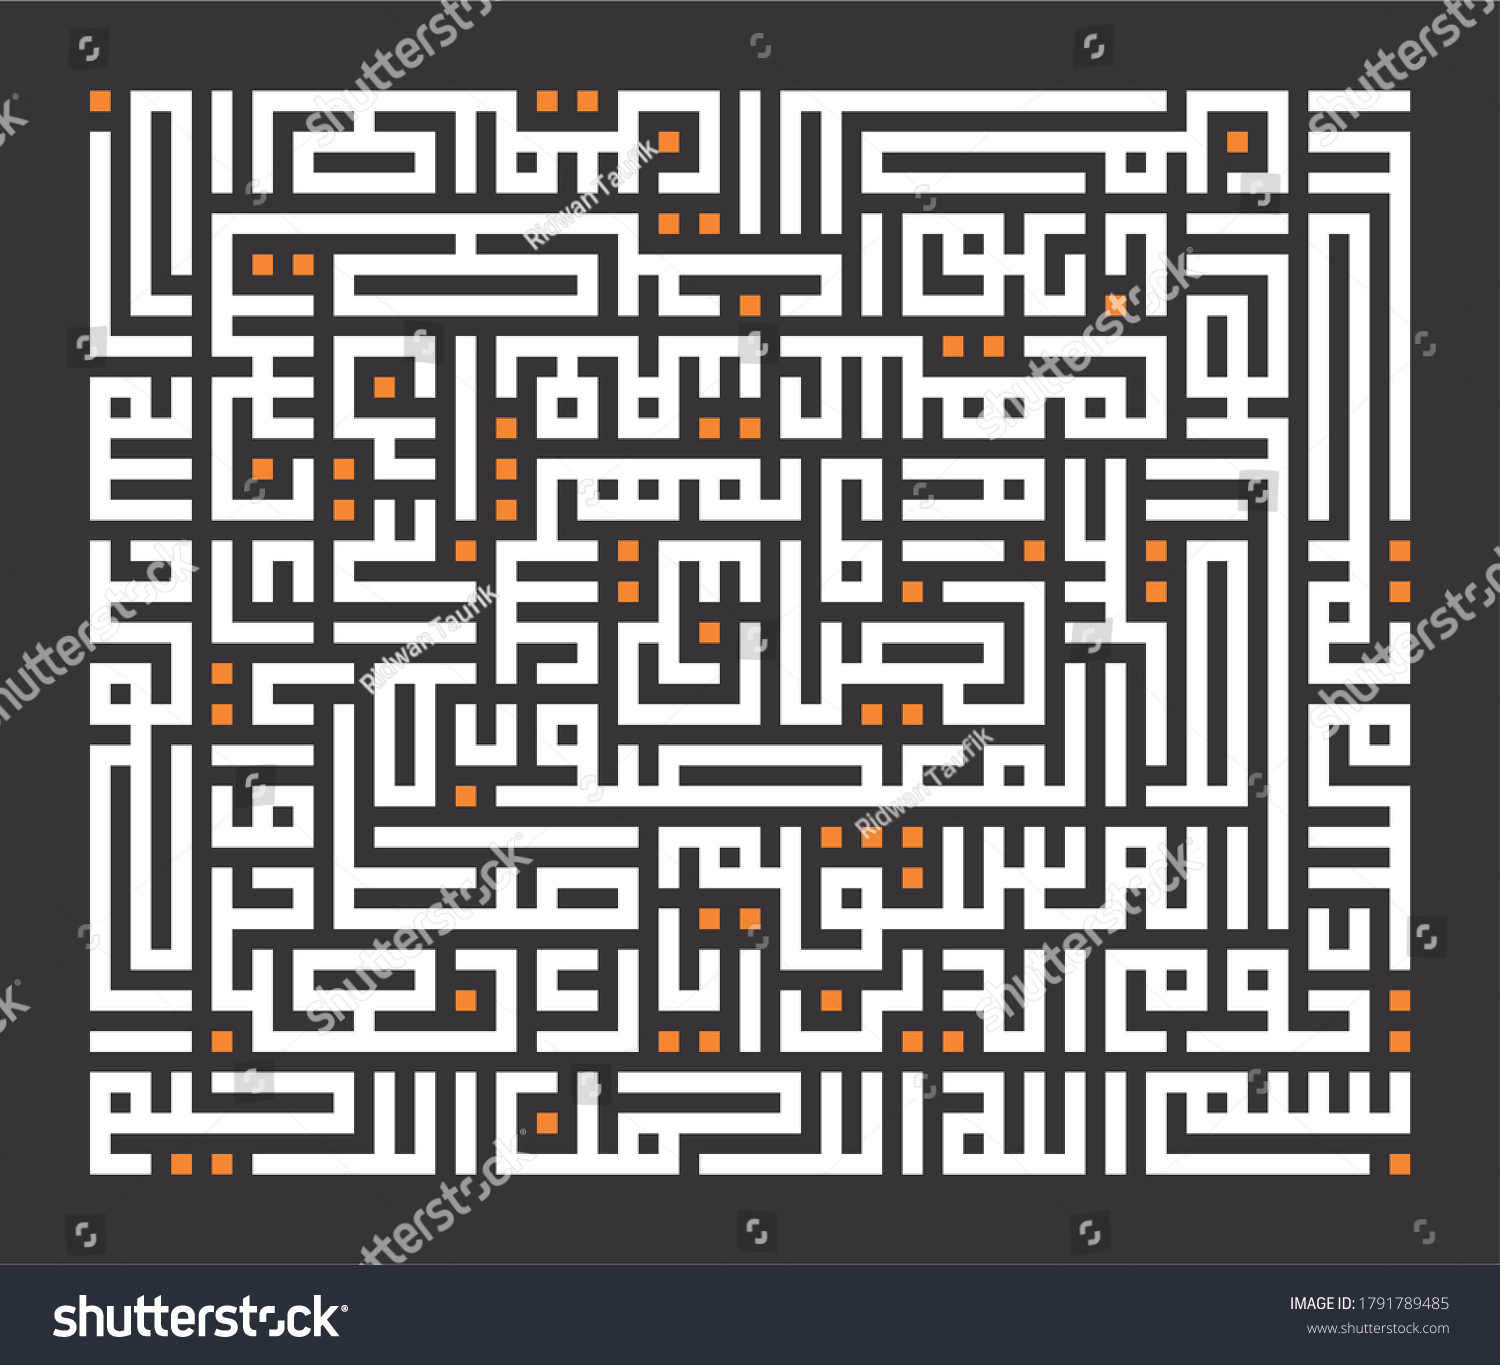 SVG of Arabic Kufi Square Calligraphy from the Noble Quran Surah al-Fatiha/Fatihah (The Opening/The Opener). Muslim always read it in every 5 times prayer and at least 17 times a day. svg